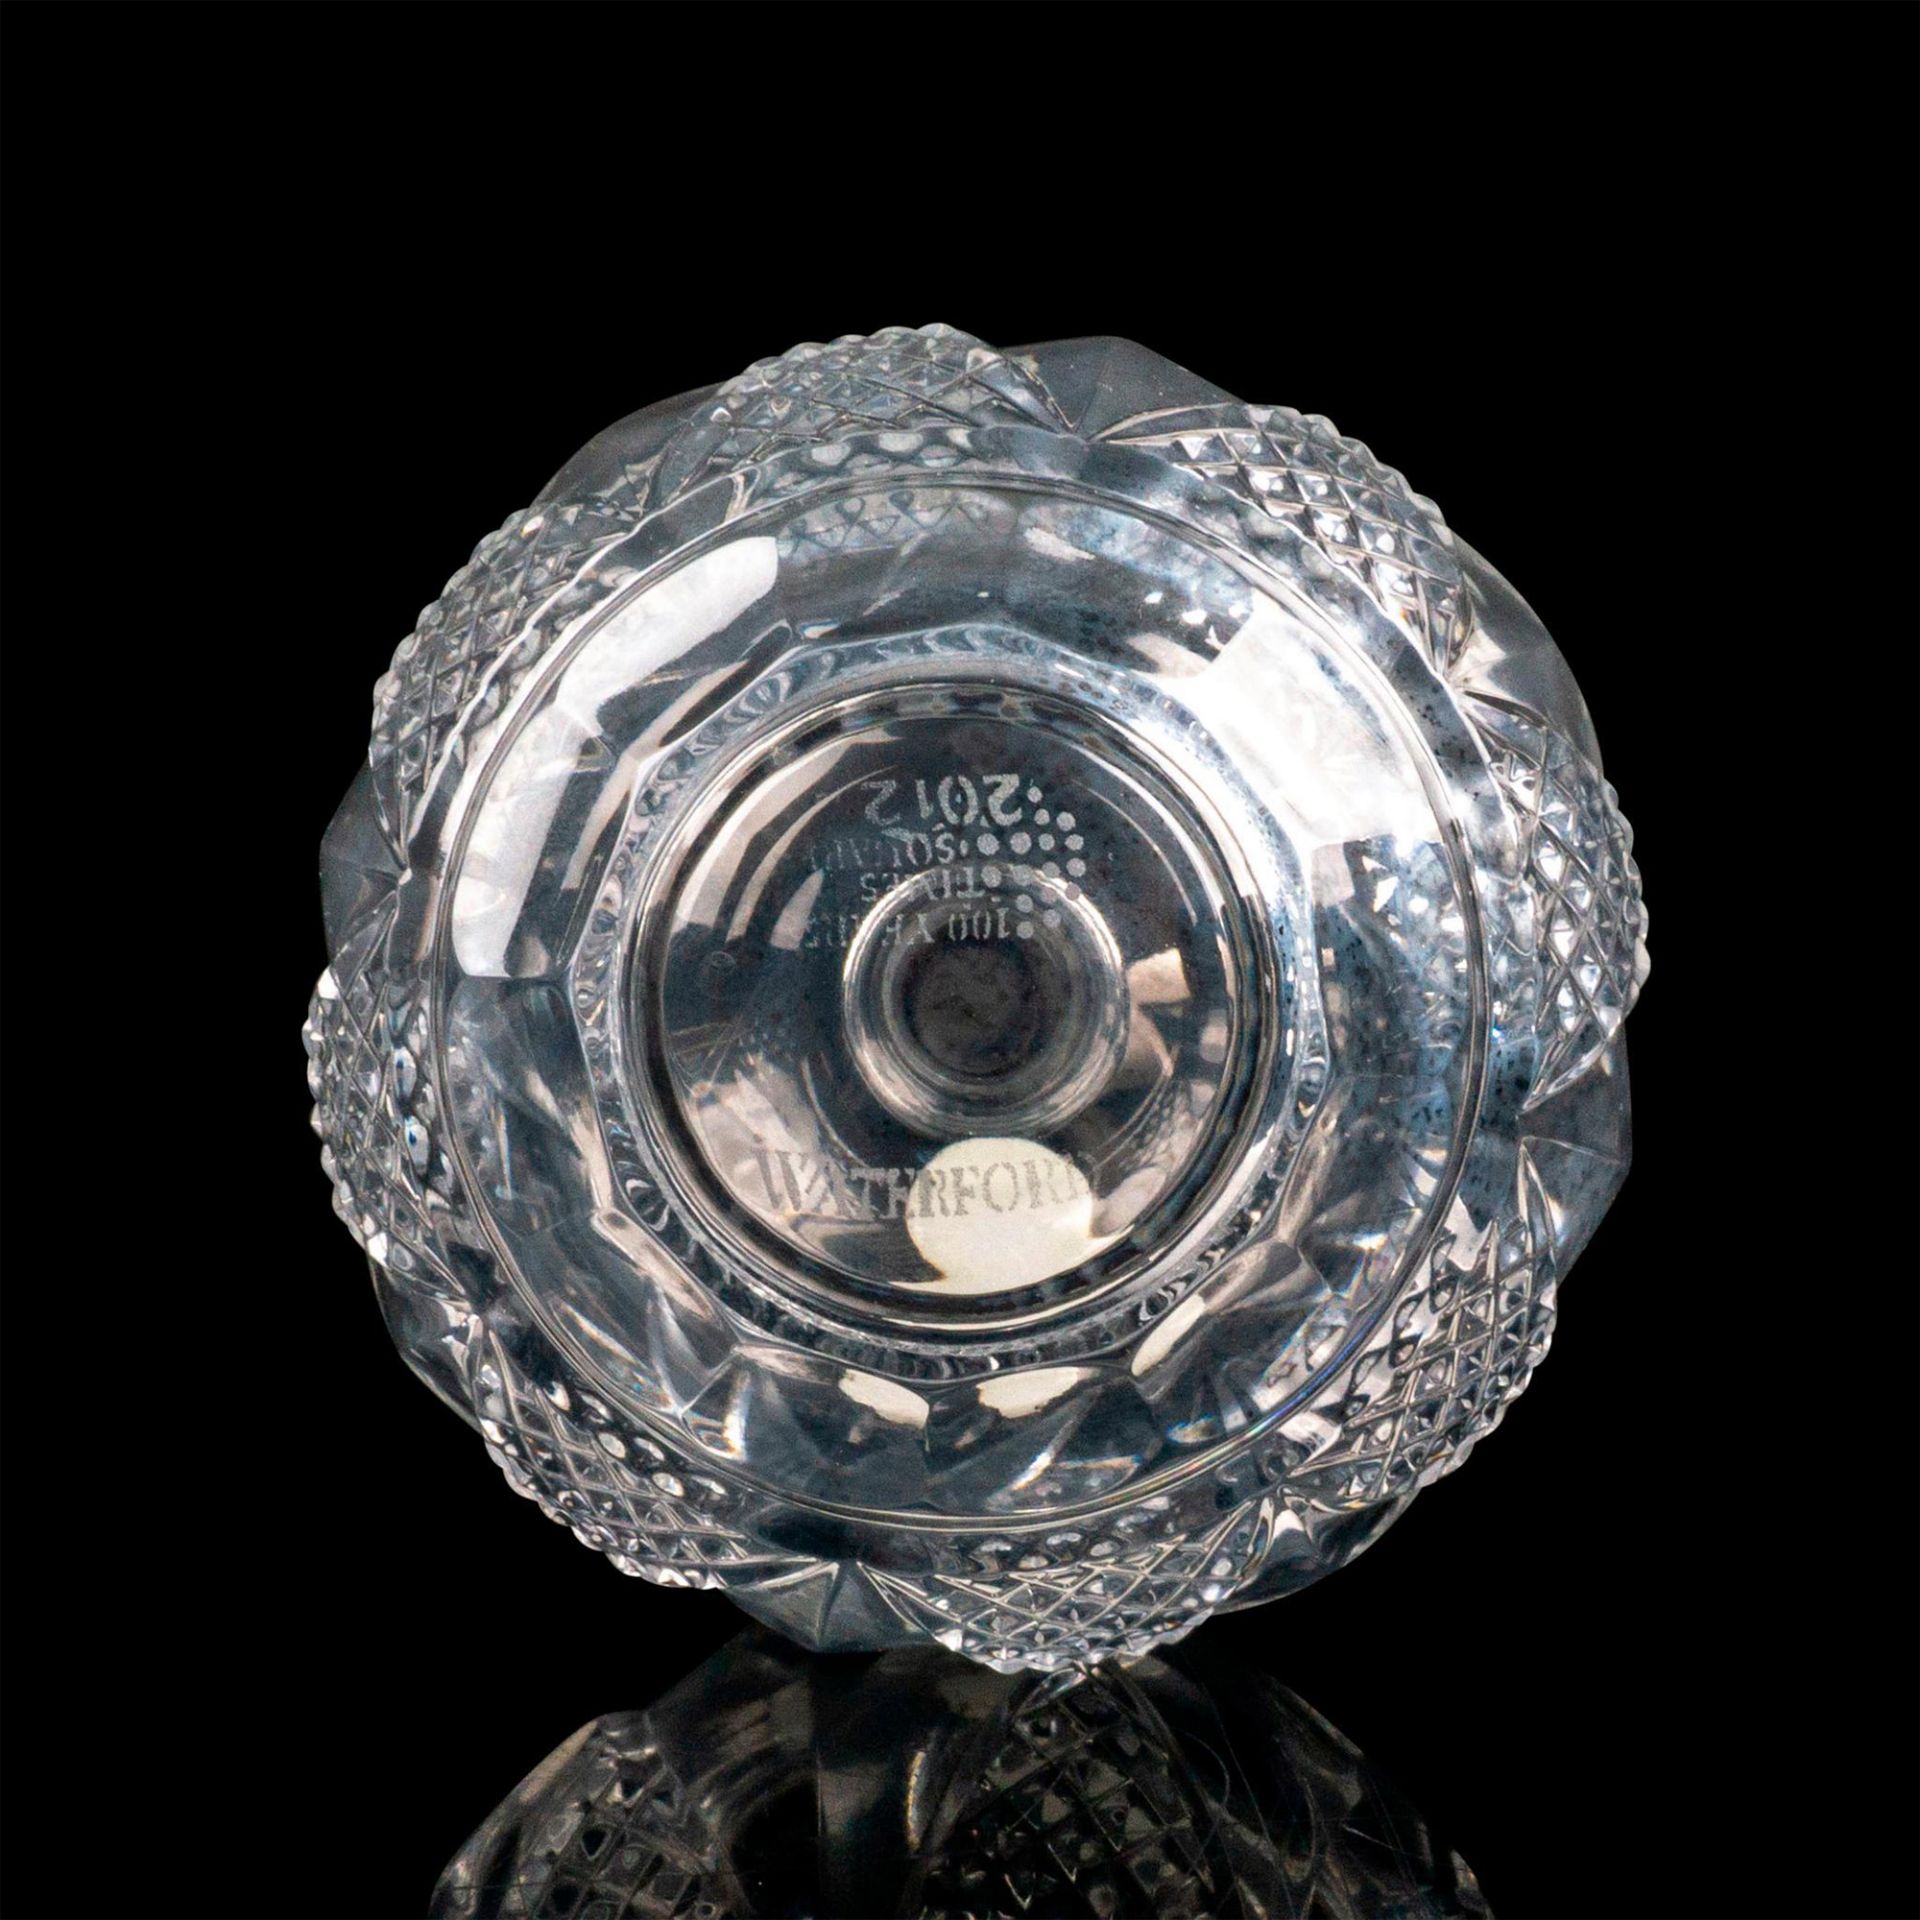 Waterford Crystal The Times Square Ball, Friendship Ornament - Image 2 of 3